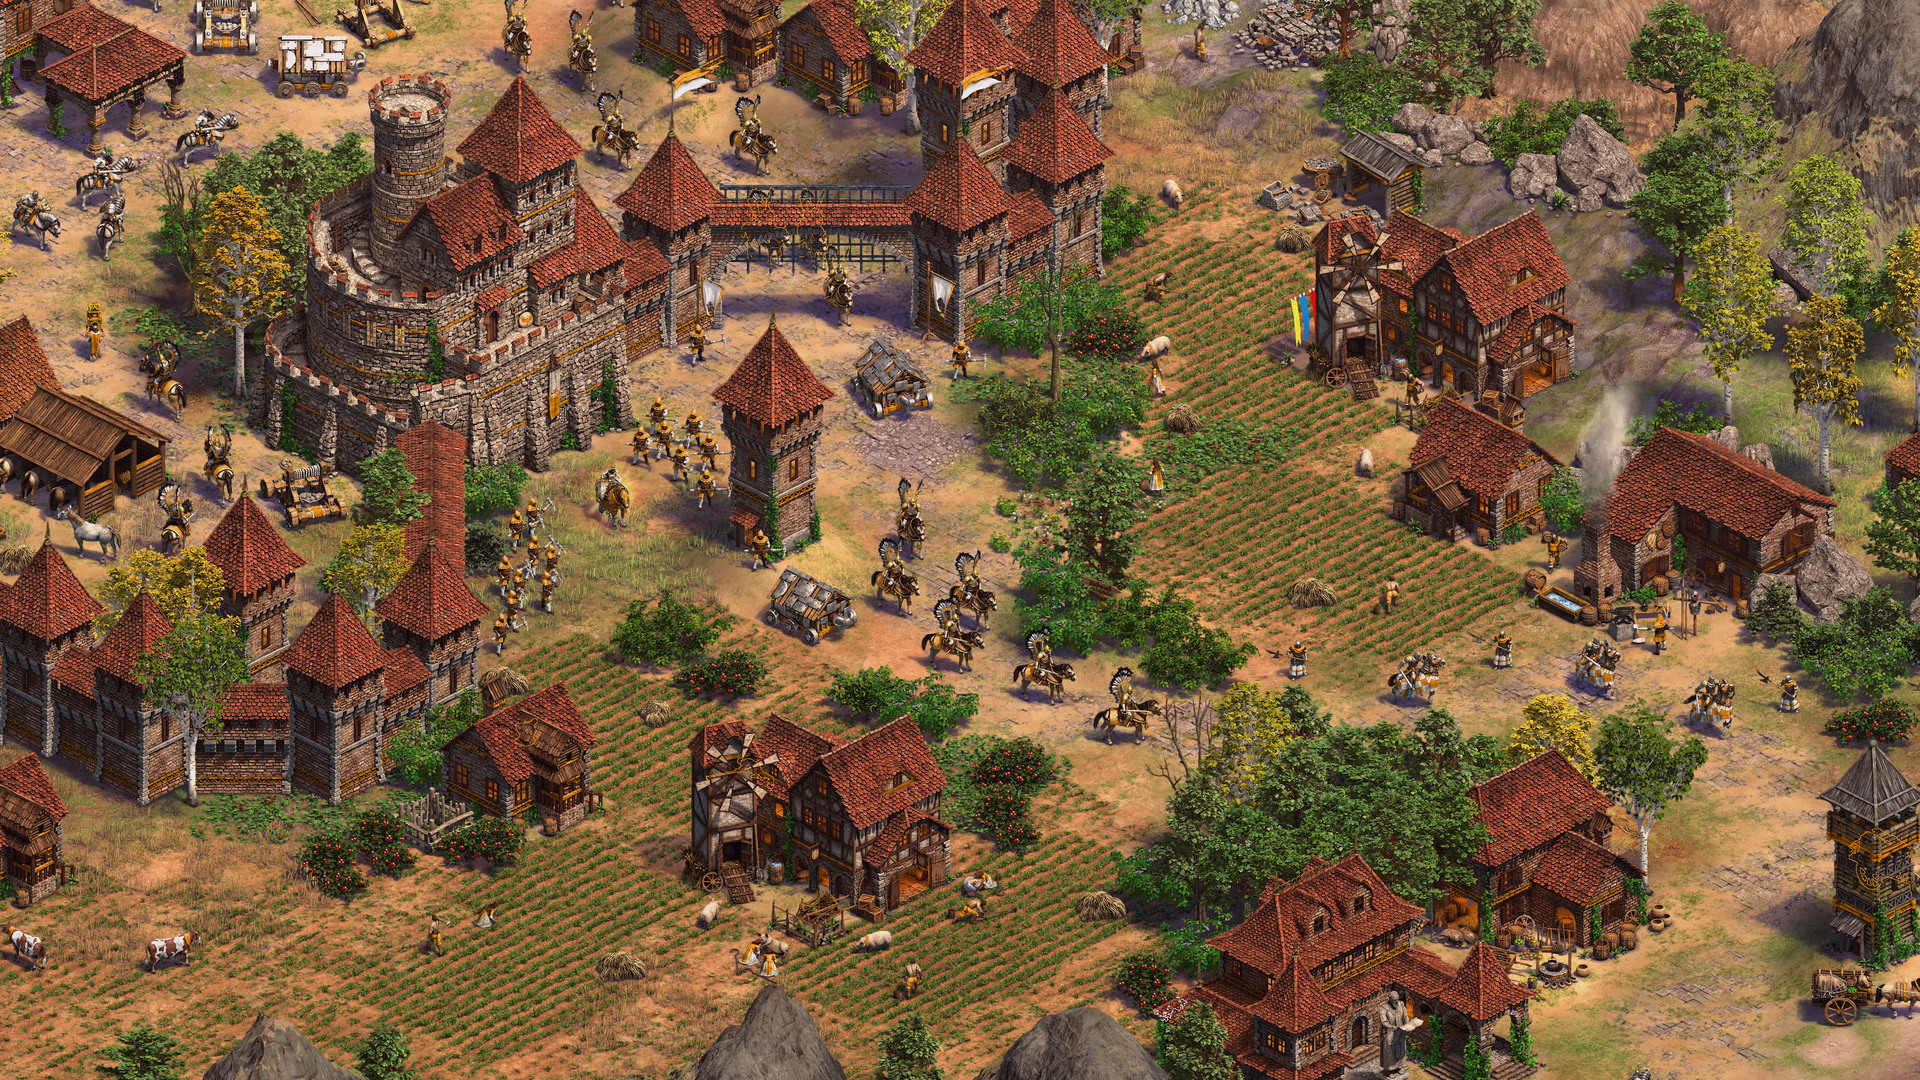 Age of Empires II: Definitive Edition - Dawn of the Dukes - screenshot 4